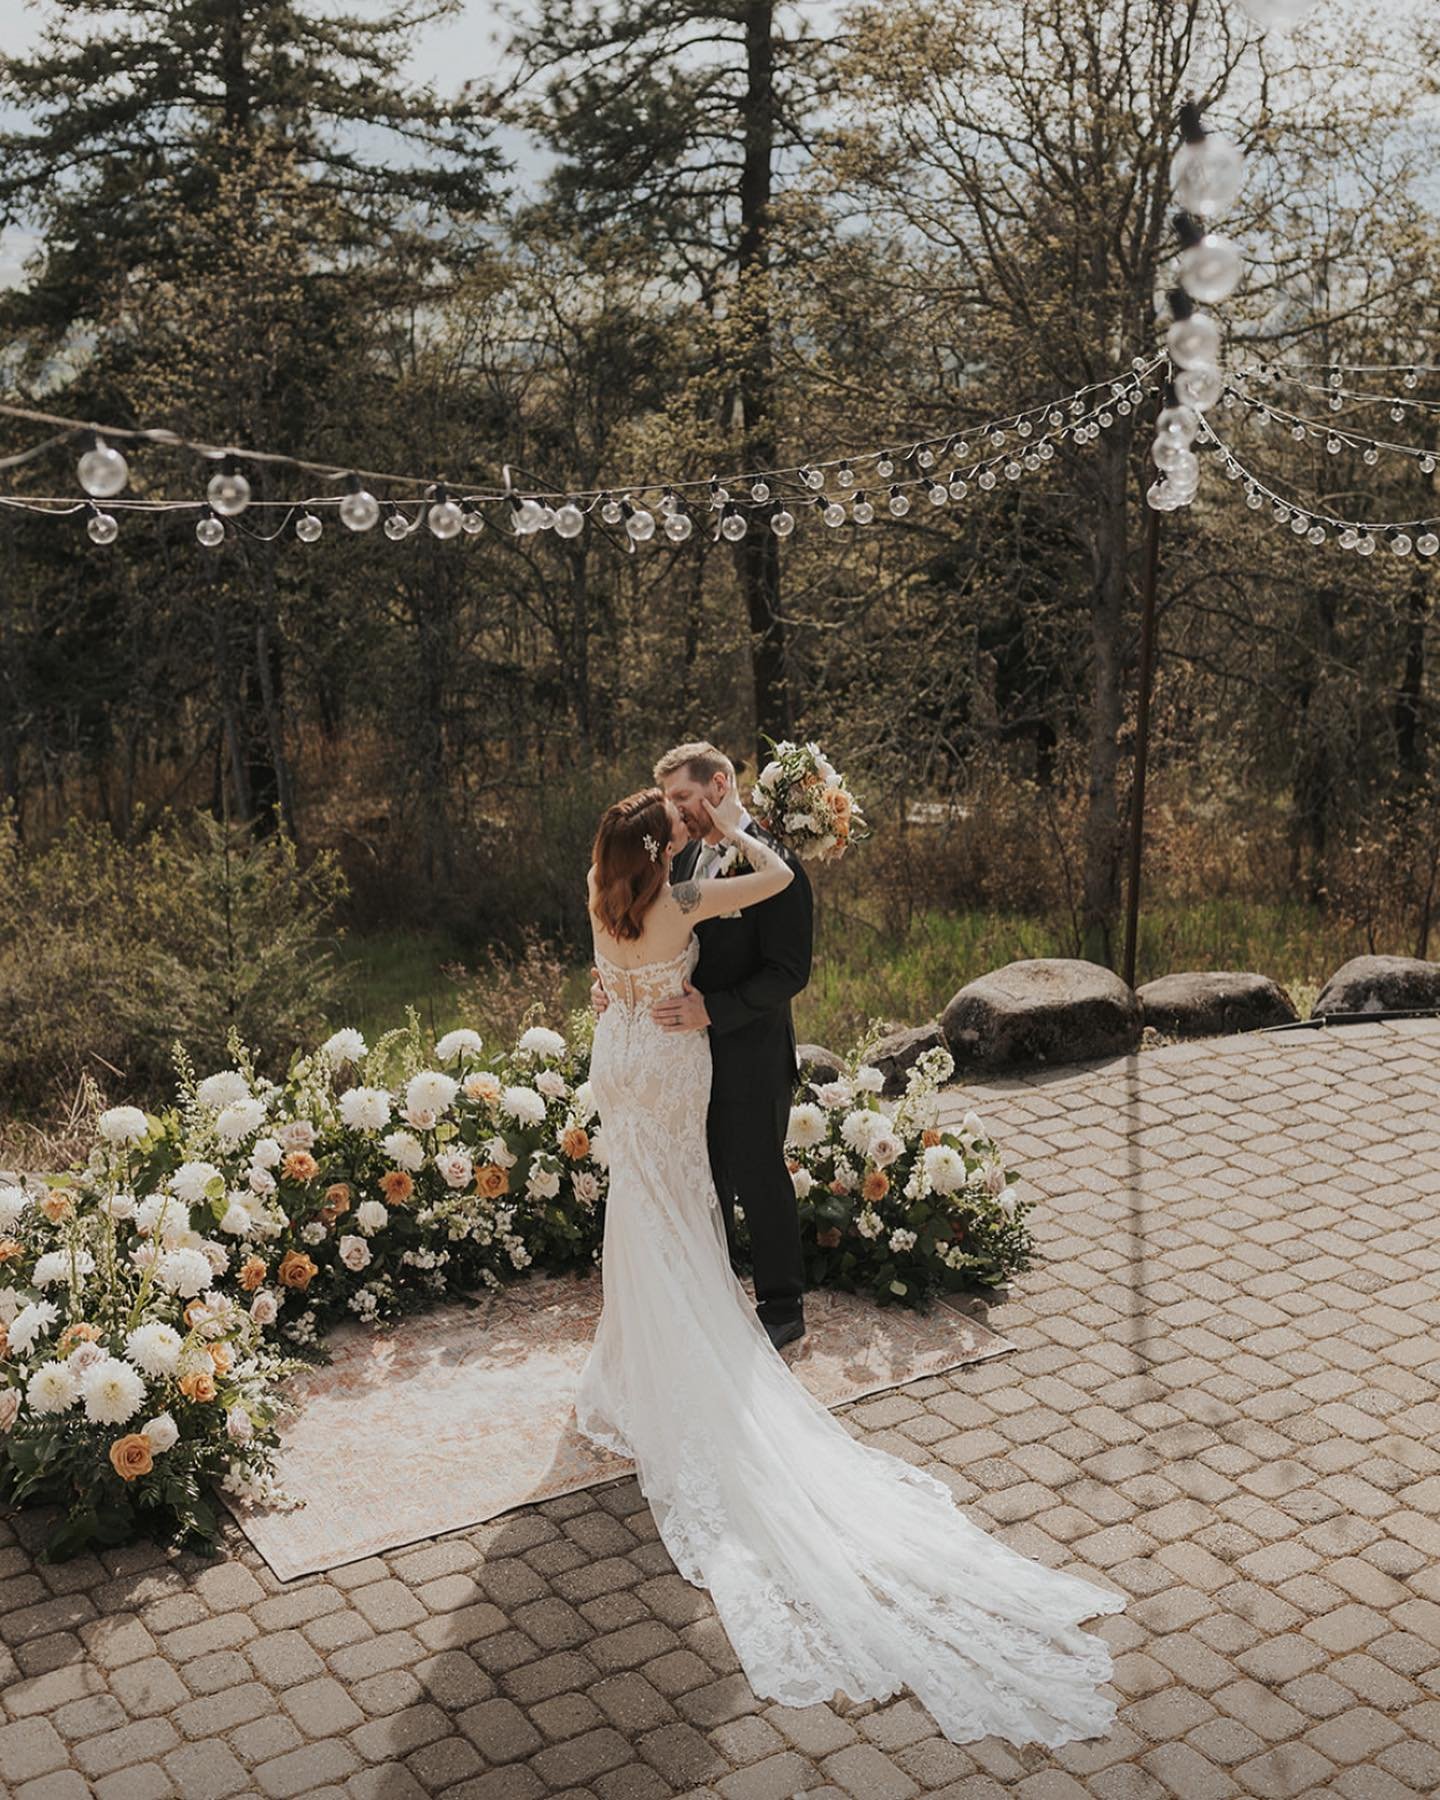 Can&rsquo;t get over these florals! 😍 @mountainviewfloraldesign stole the show with this floral ground arch ❤️ Can't wait to see more incredible things happen at the Crag Rat Hut this year!

Venue- @THECRAGRATHUT
Photography- @CHRISTINAWHITTLESEYPHO